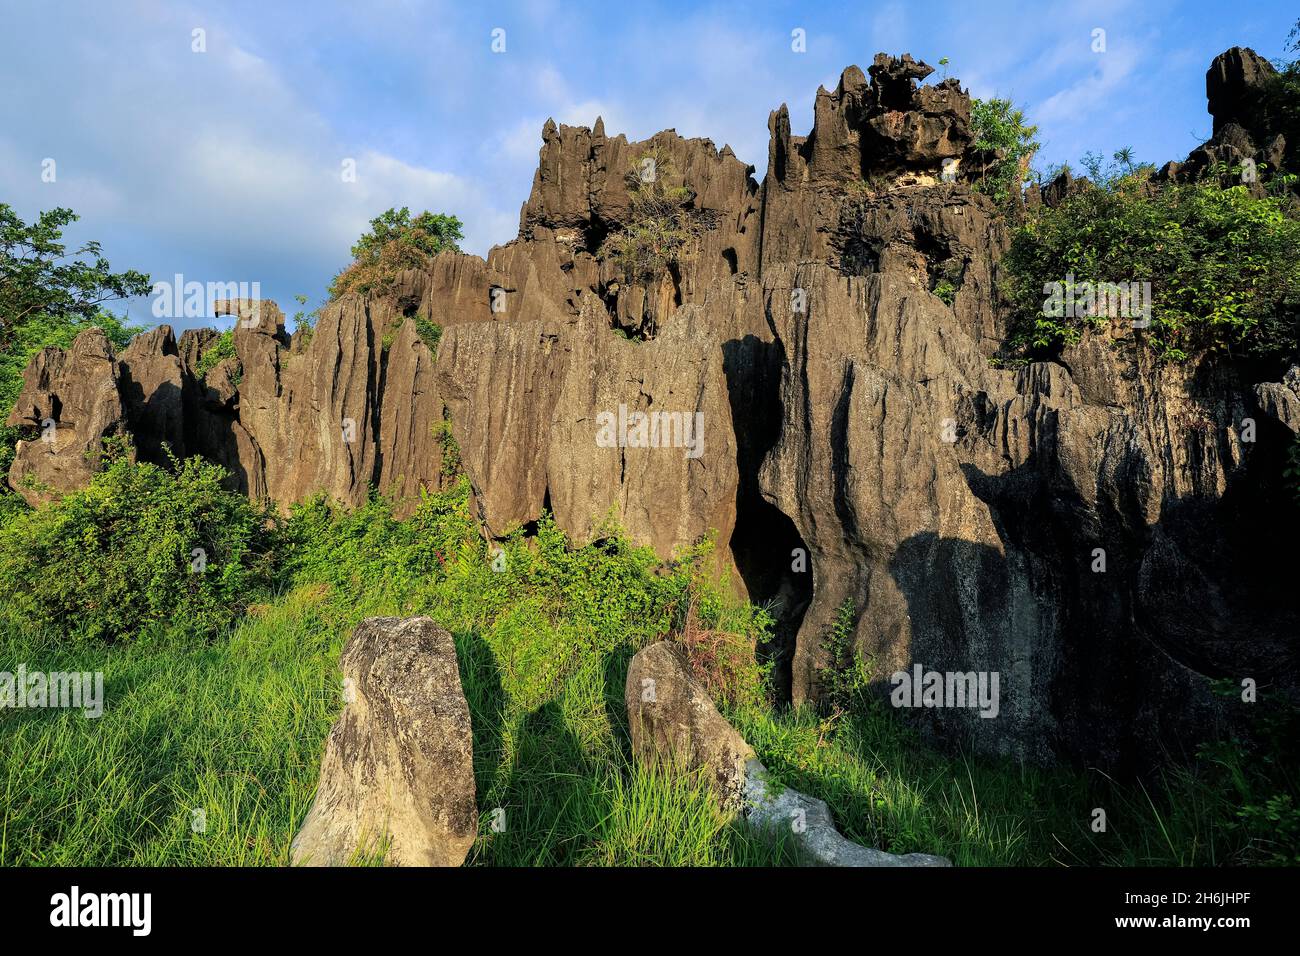 Limestone rock eroded and dissolved by water in karst region, Rammang-Rammang, Maros, South Sulawesi, Indonesia, Southeast Asia, Asia Stock Photo